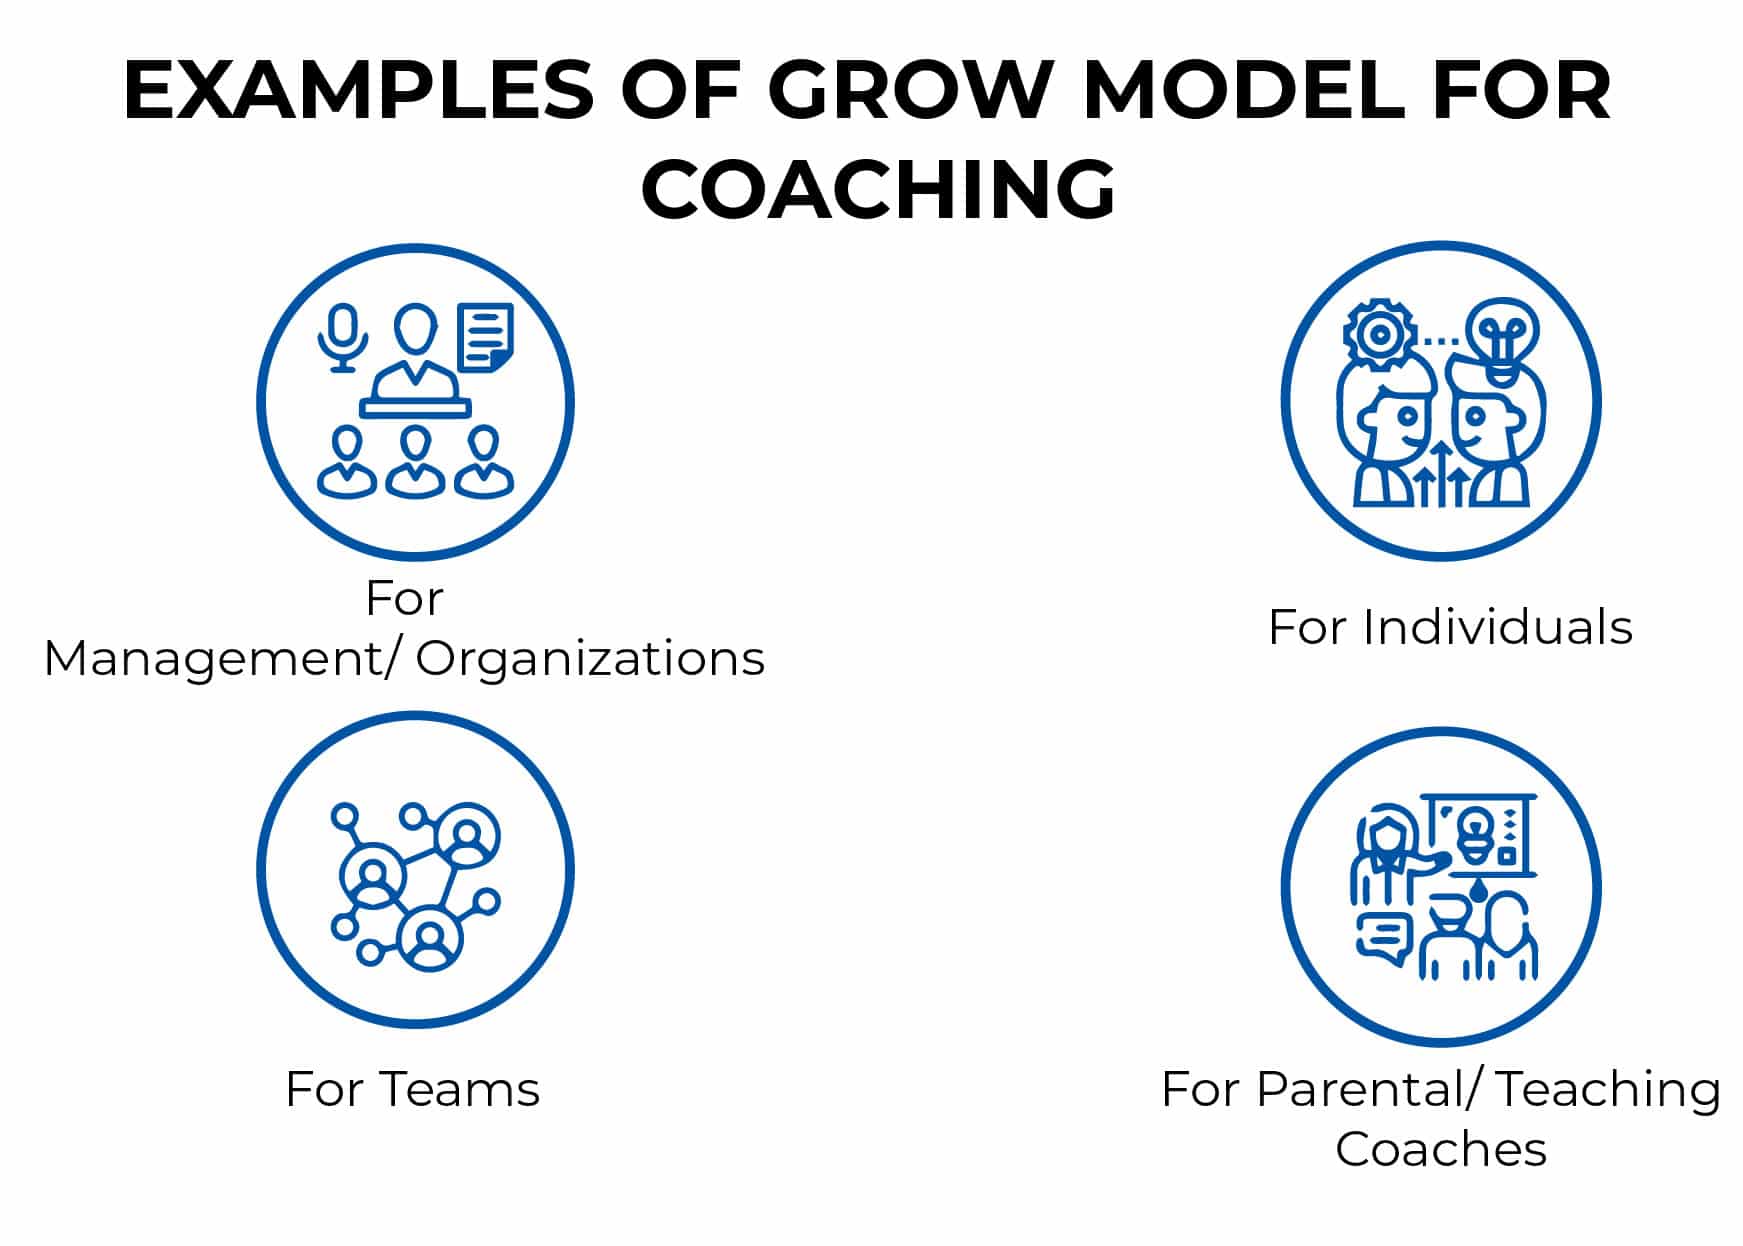 EXAMPLES OF GROW MODEL FOR COACHING